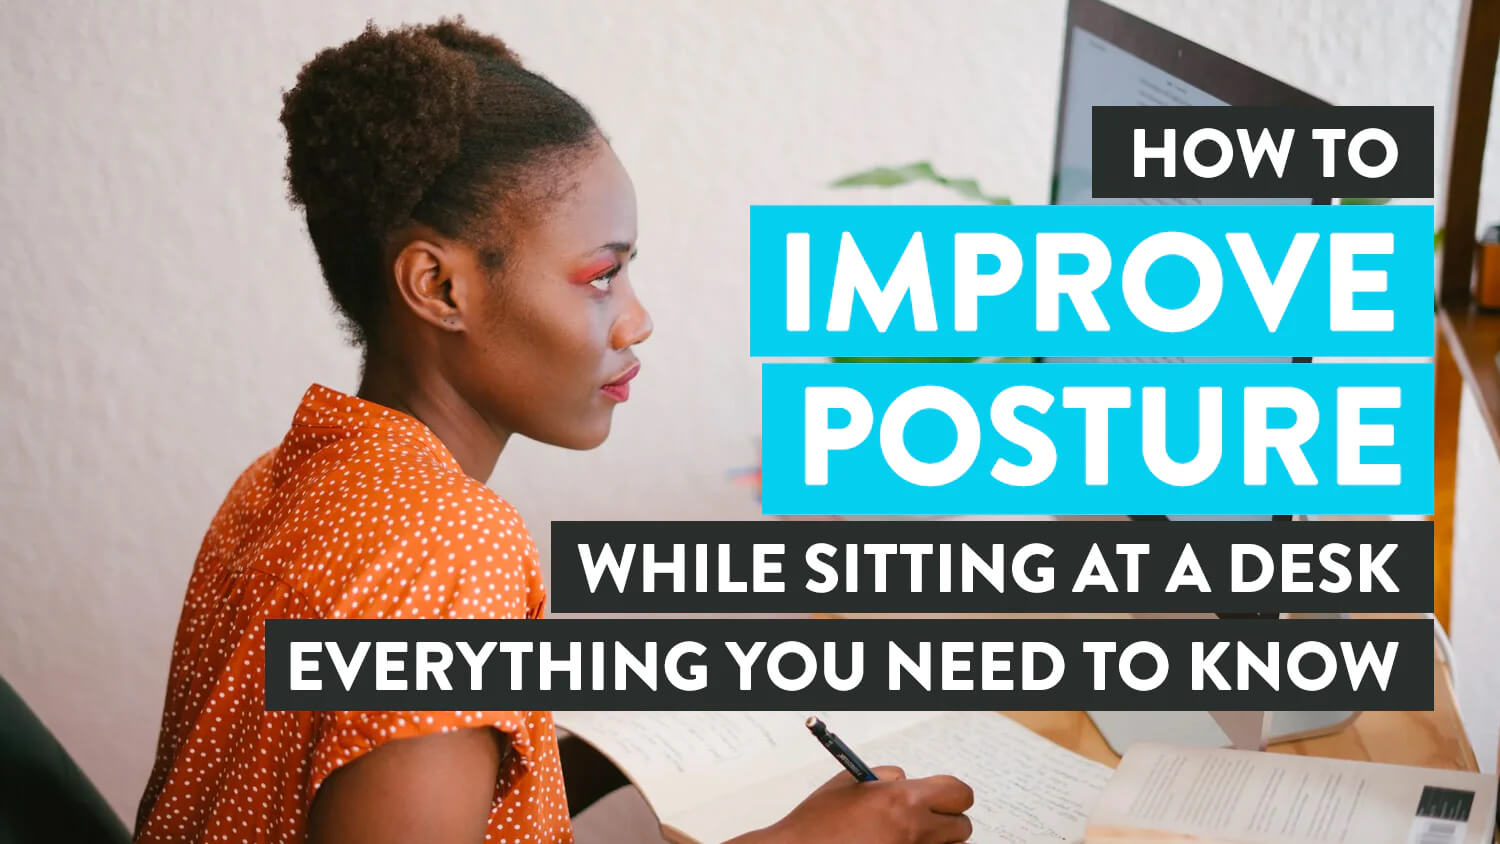 How to Improve Posture While Sitting at Desk: A Brief Guide - Desky USA